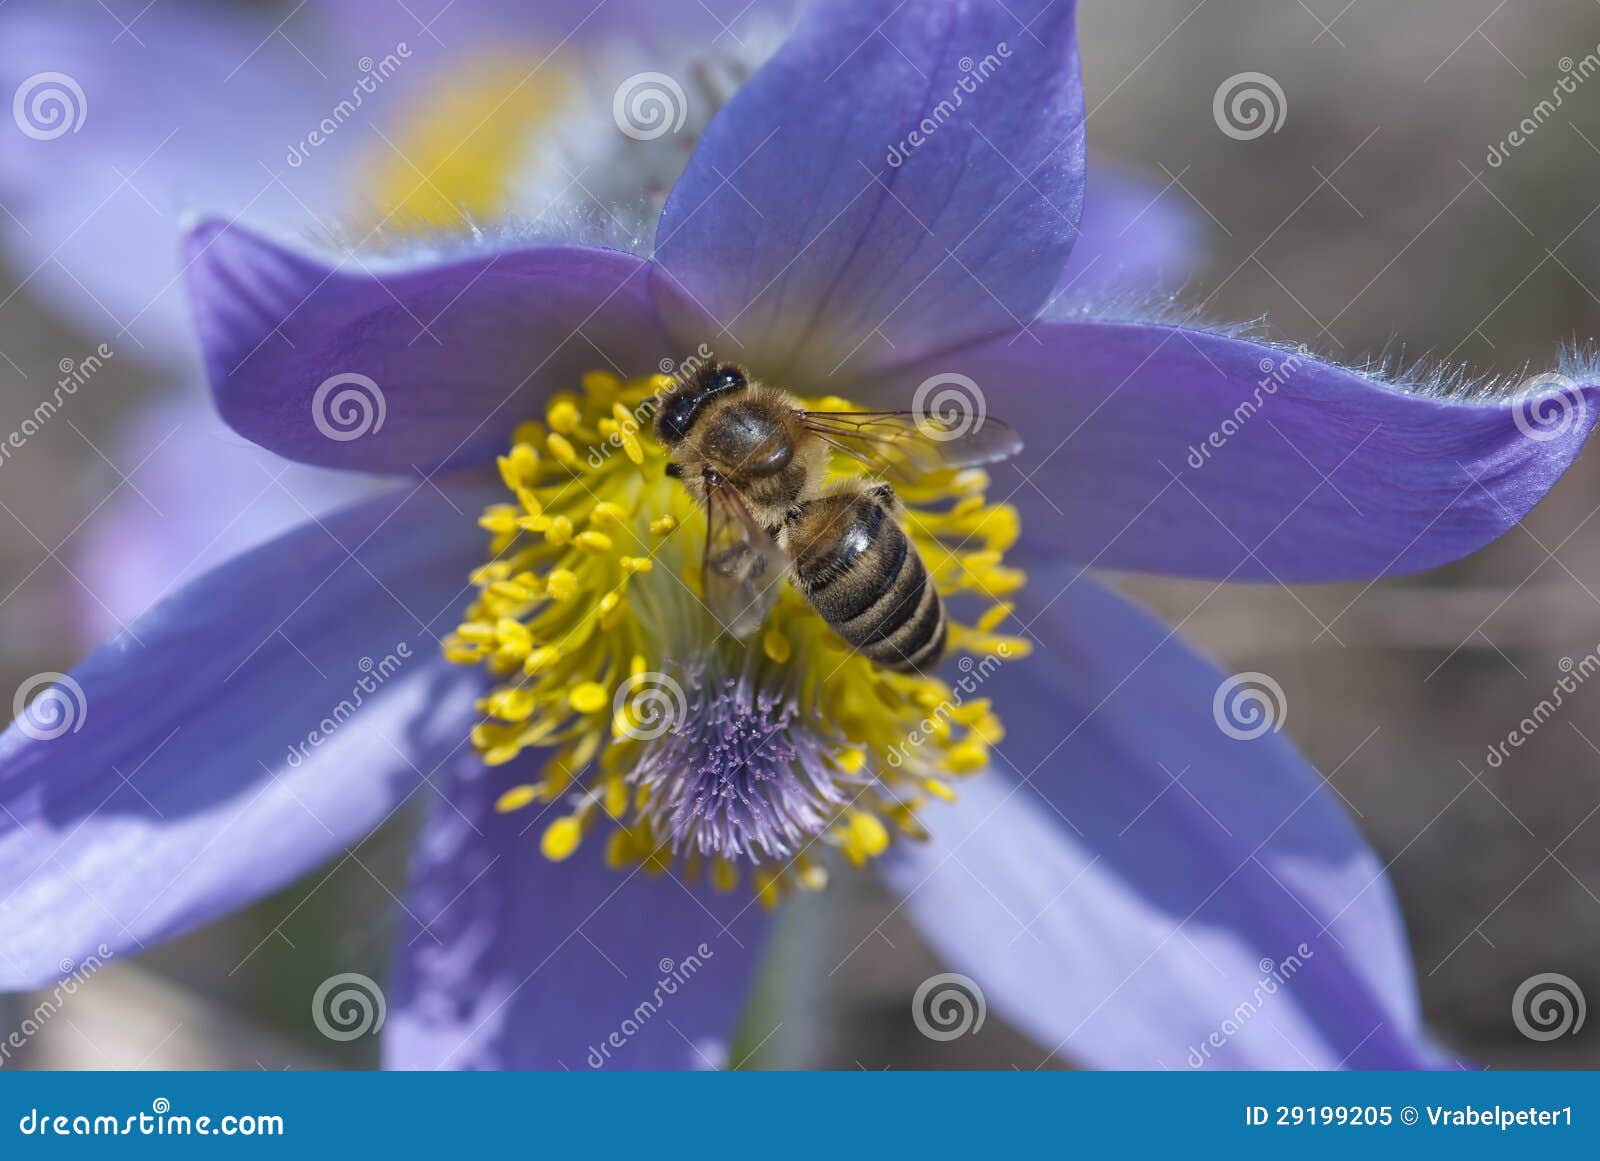 bee climbs and pollinate pulsatilla flower